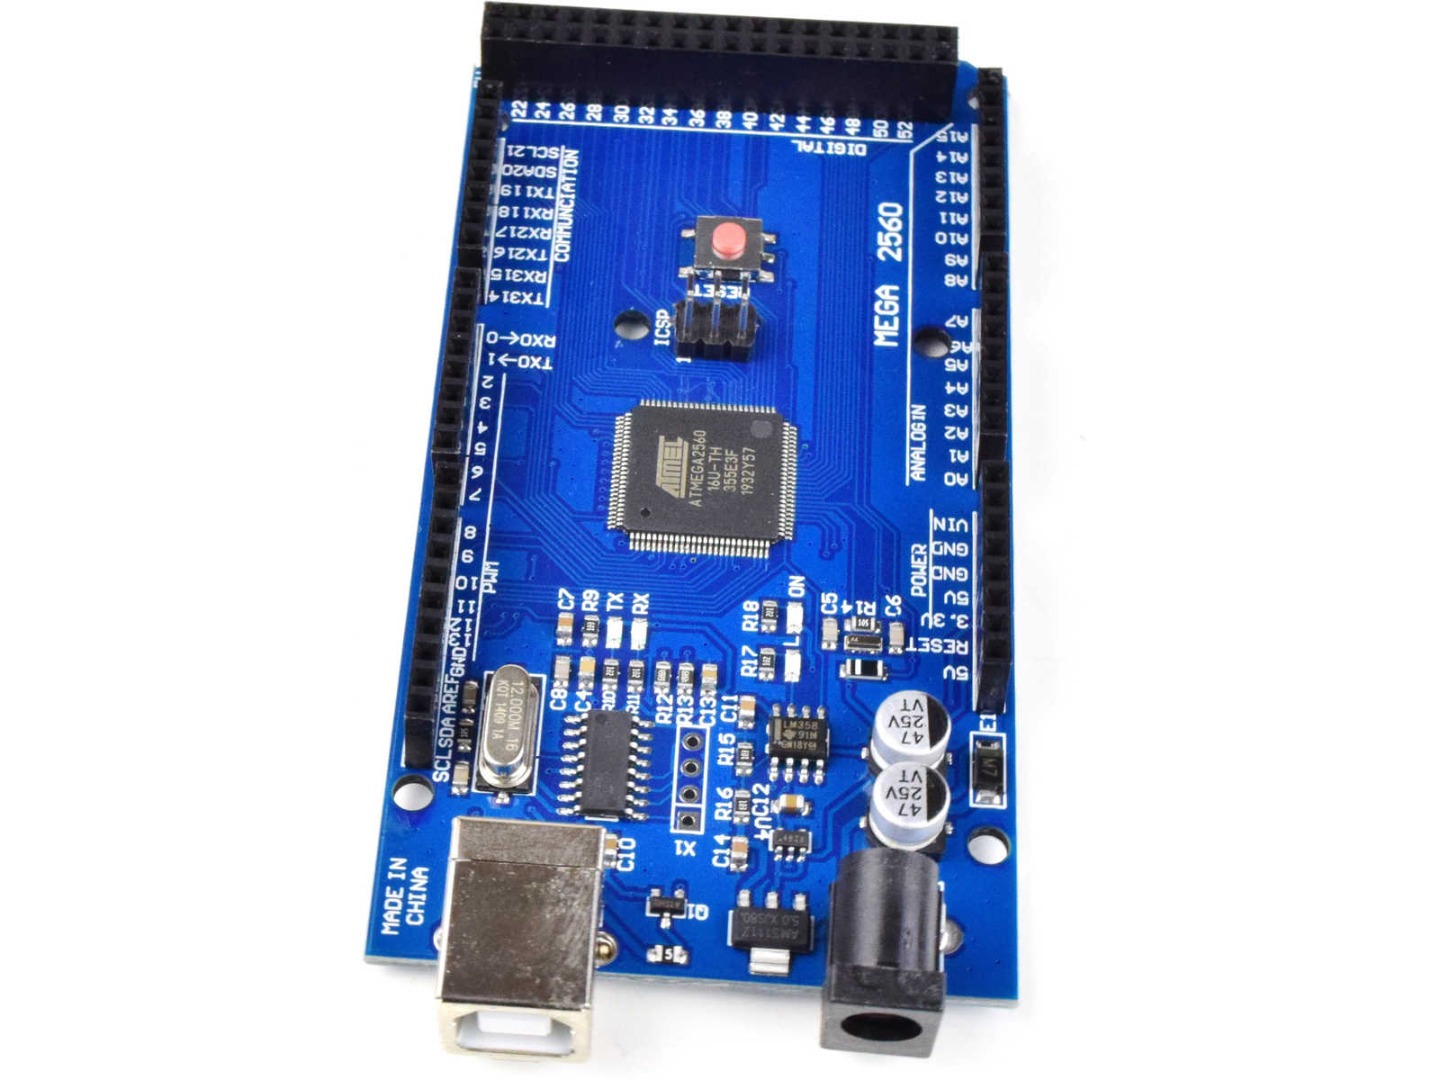 MEGA 2560 R3 module with Atmega2560 + CH340 USB (100% compatible with Arduino) 7